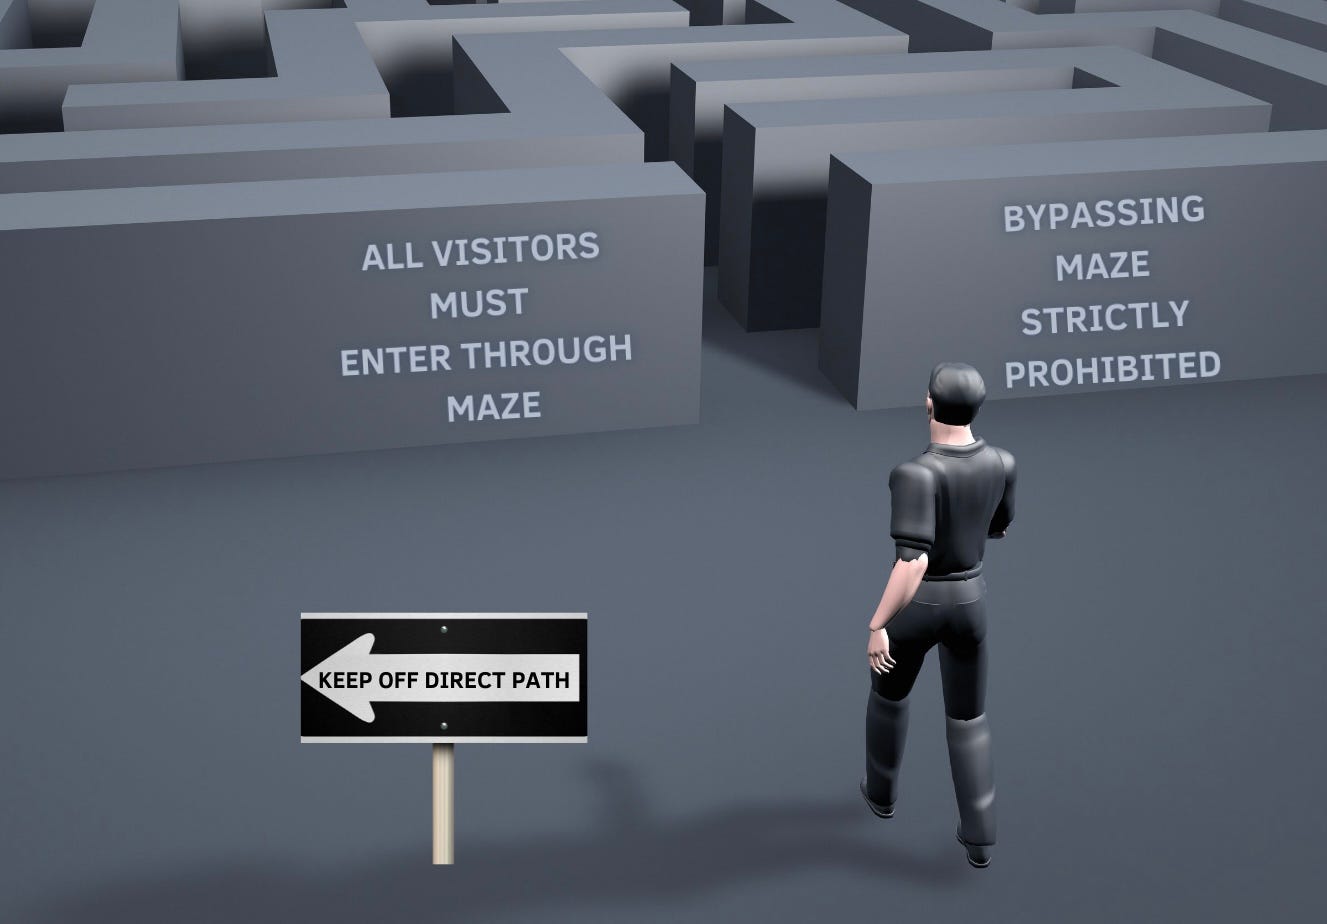 Man approach maze which has signs forbidding him to bypass it.